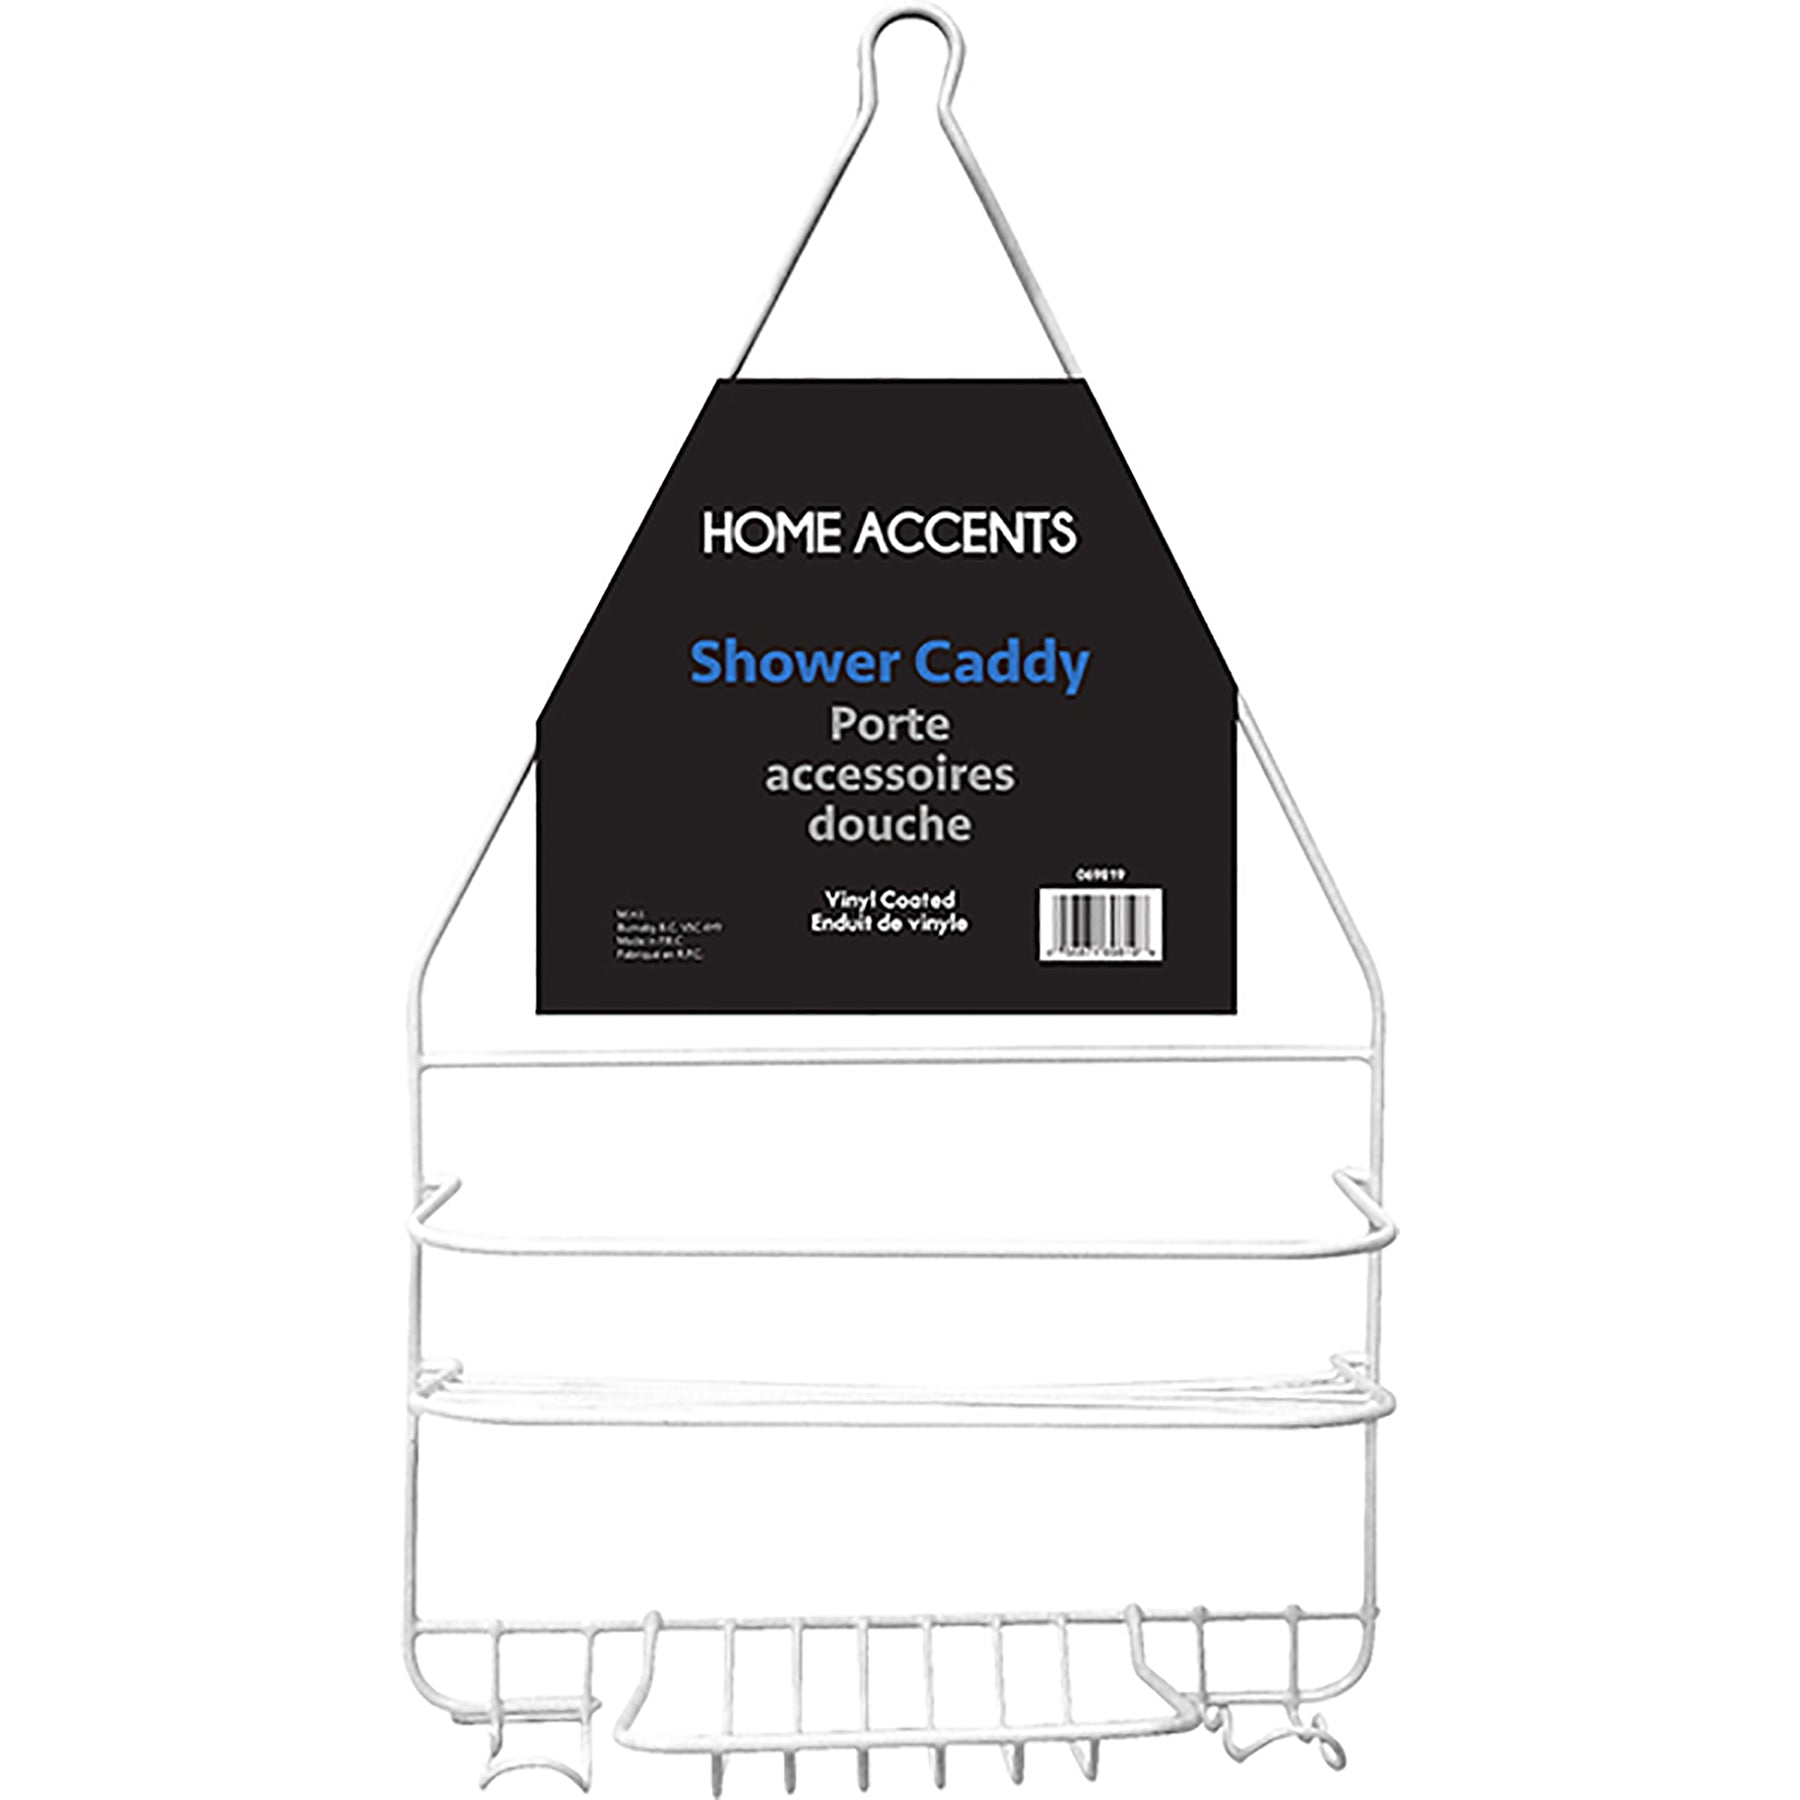 Home Accents Shower Caddy Vinyl Coated 17.5x9.75in